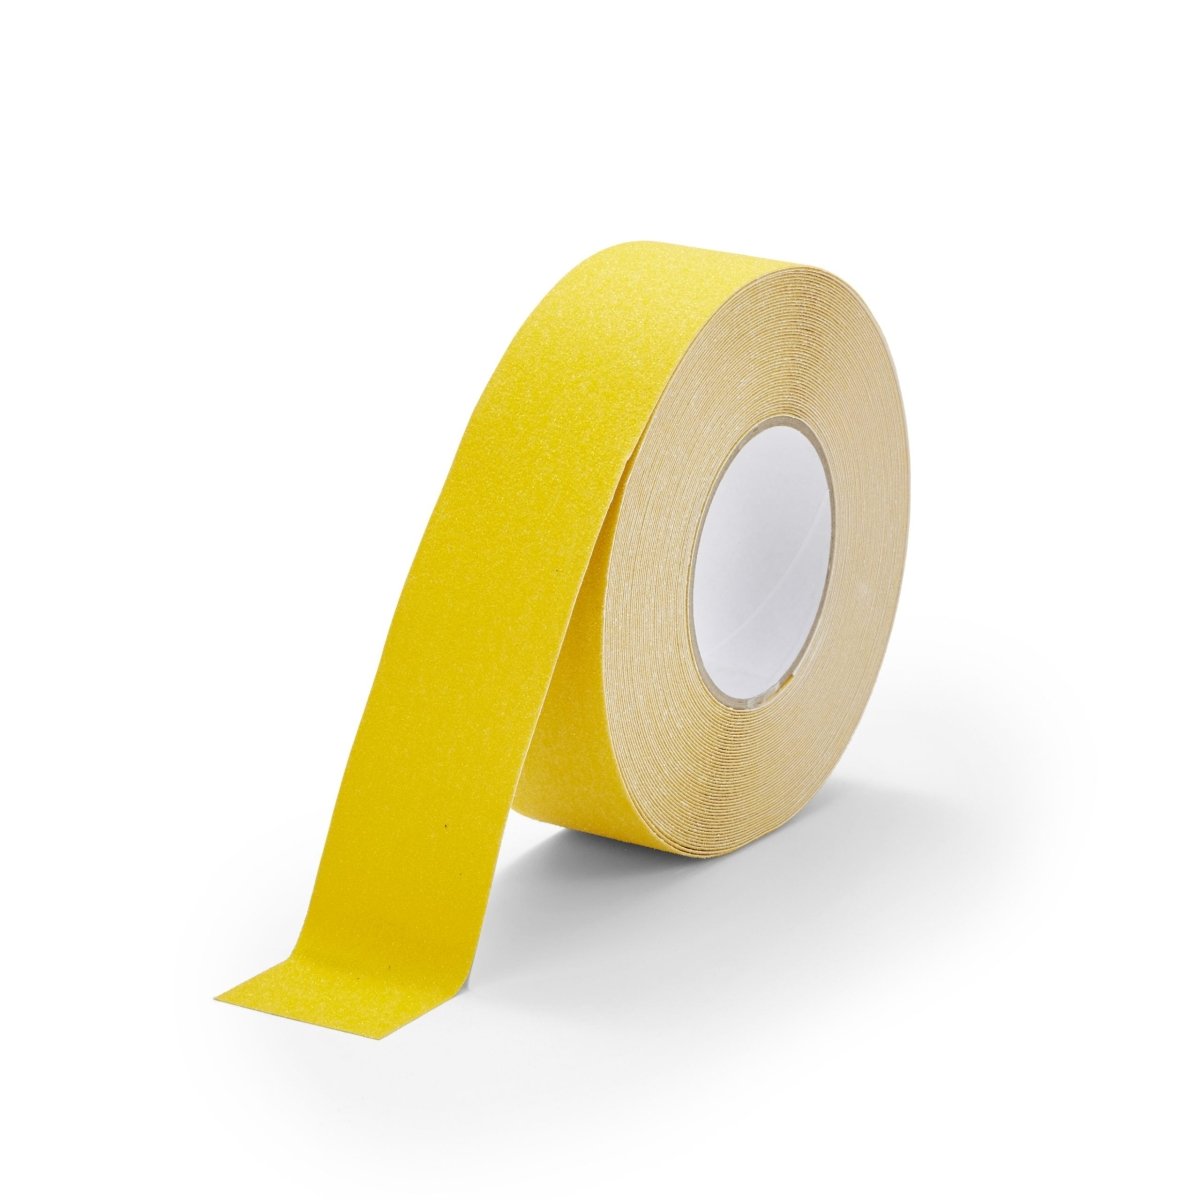 Conformable Traction Grade Anti Slip Tape Rolls - Slips Away - Conformable Anti-Slip Tape - H3406Y-Conformable-Safety-Grip-Yellow-50mm-1-1-1 -